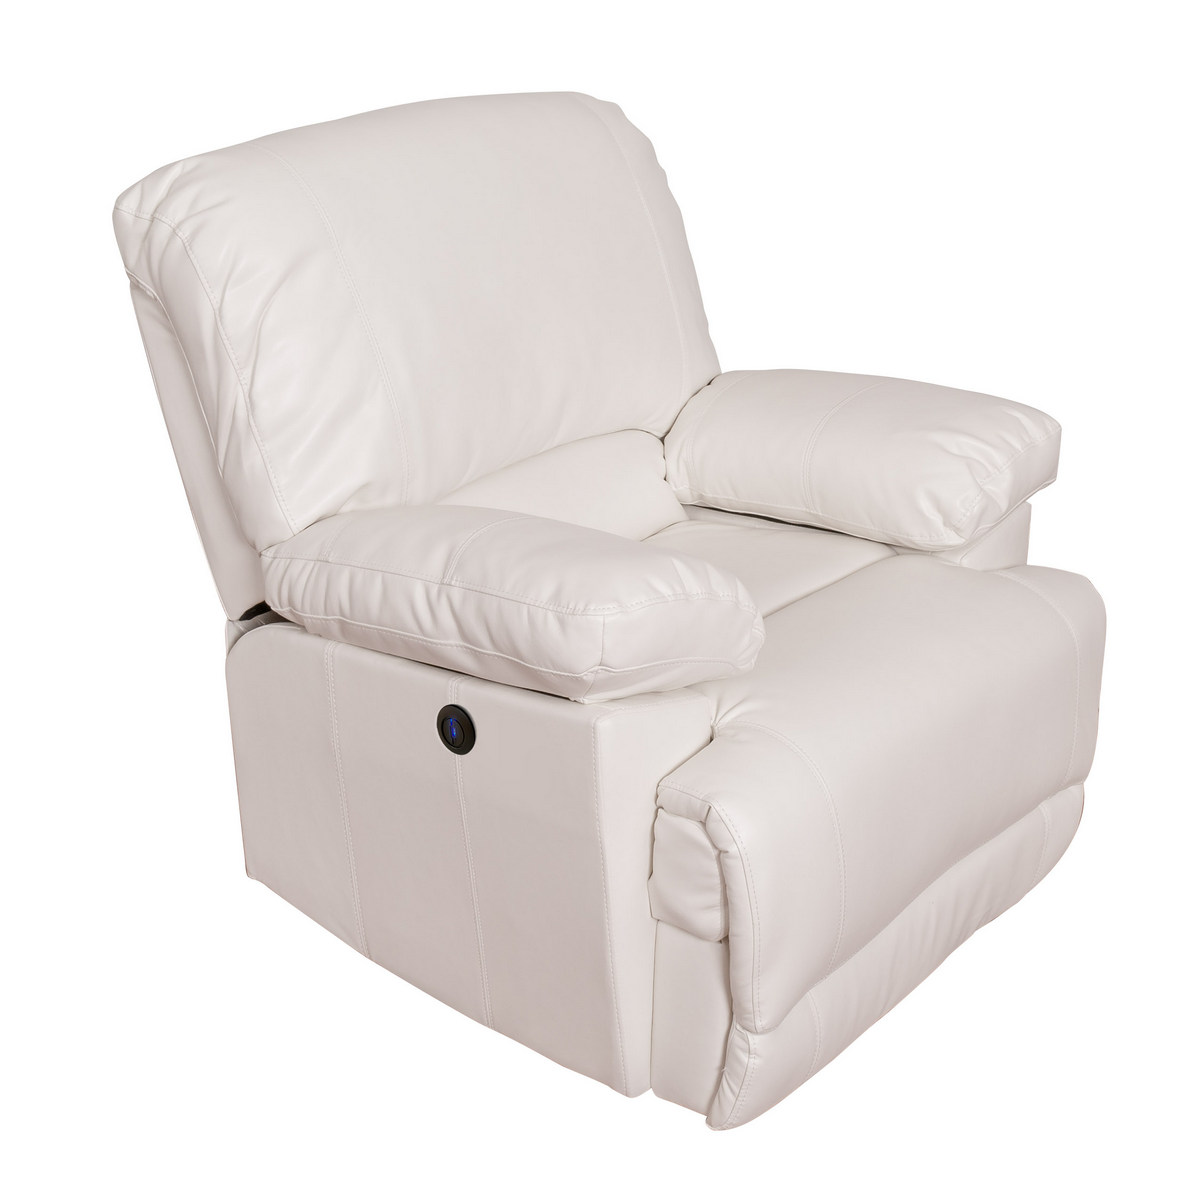 Corliving Lzy-312-r Lea White Bonded Leather Power Recliner W/ Usb Port